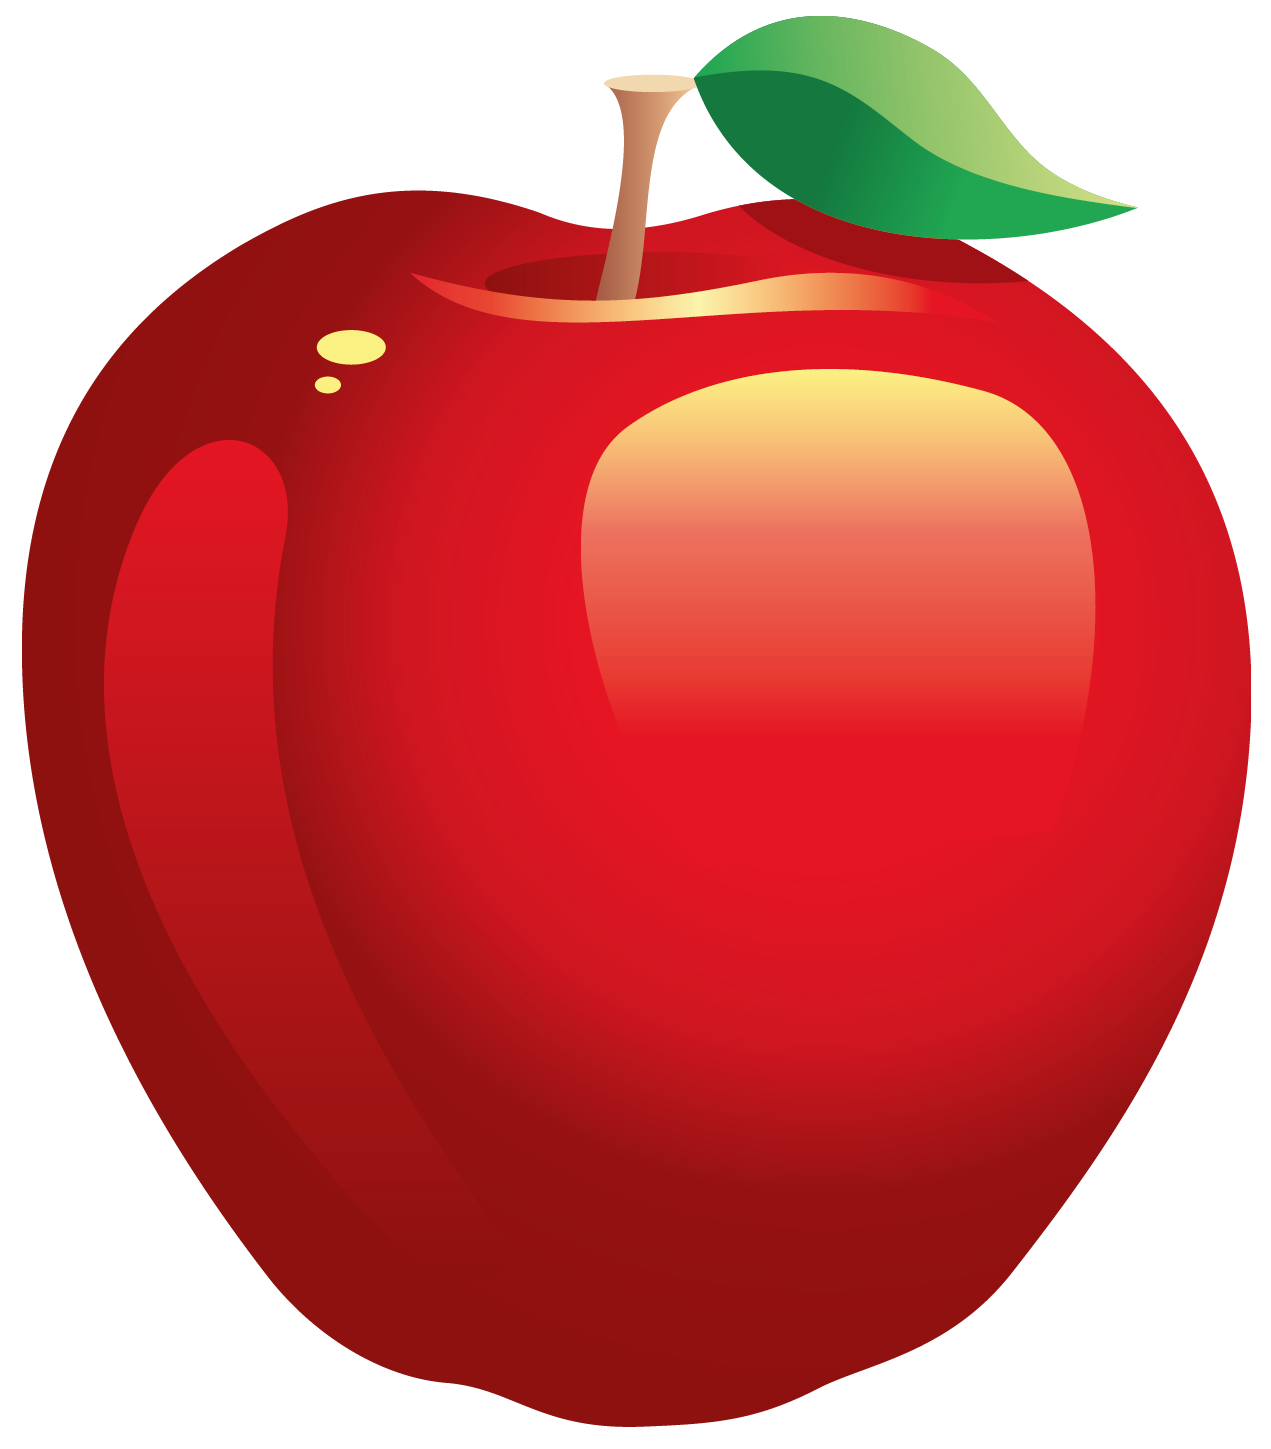 Free Apple Clip Art - clipart - Clipart Of Apple